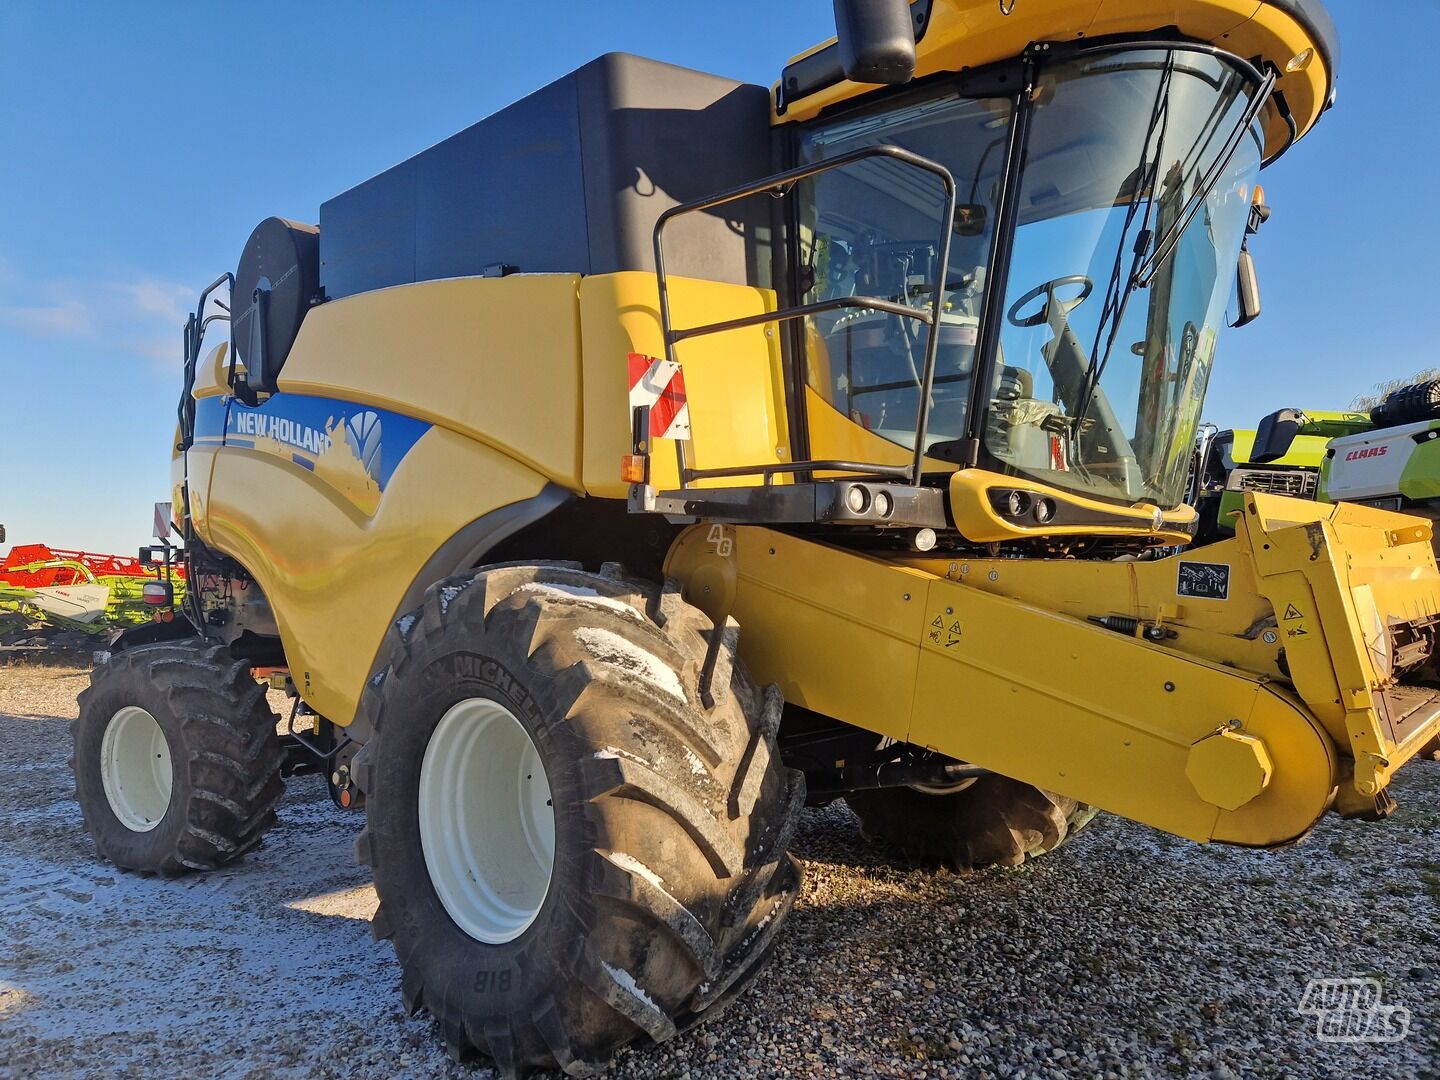 New Holland CX 8.85 2016 y Harvester